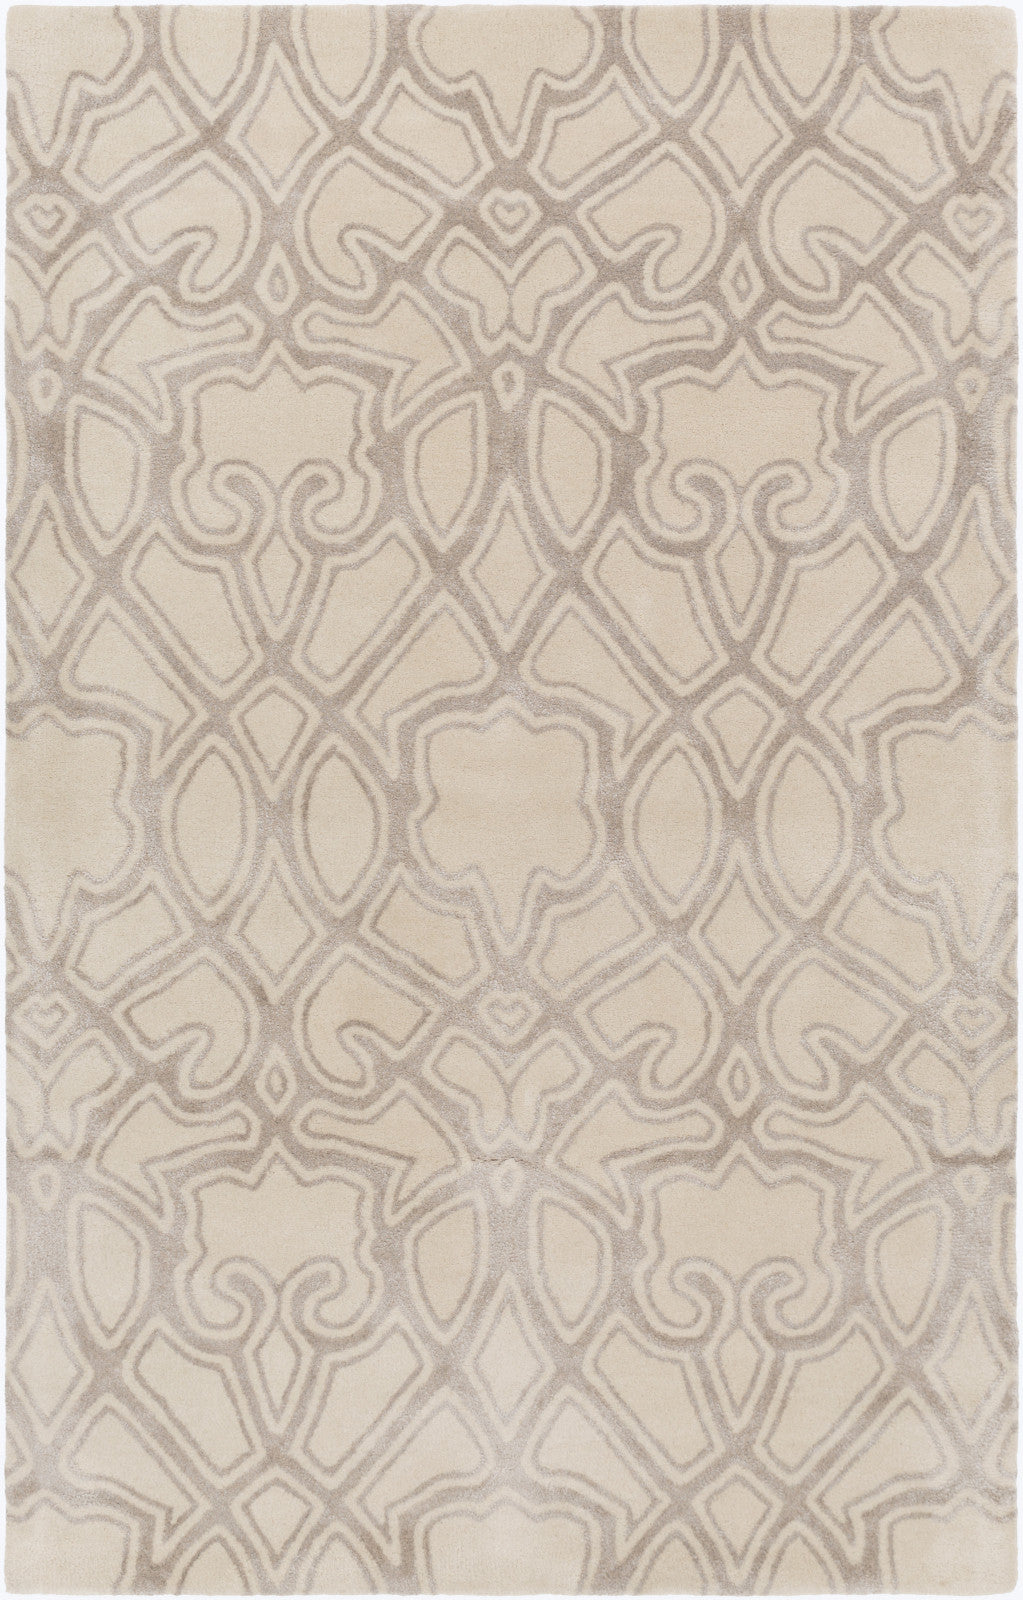 Surya Mount Perry MTP-1011 Area Rug by Florence Broadhurst